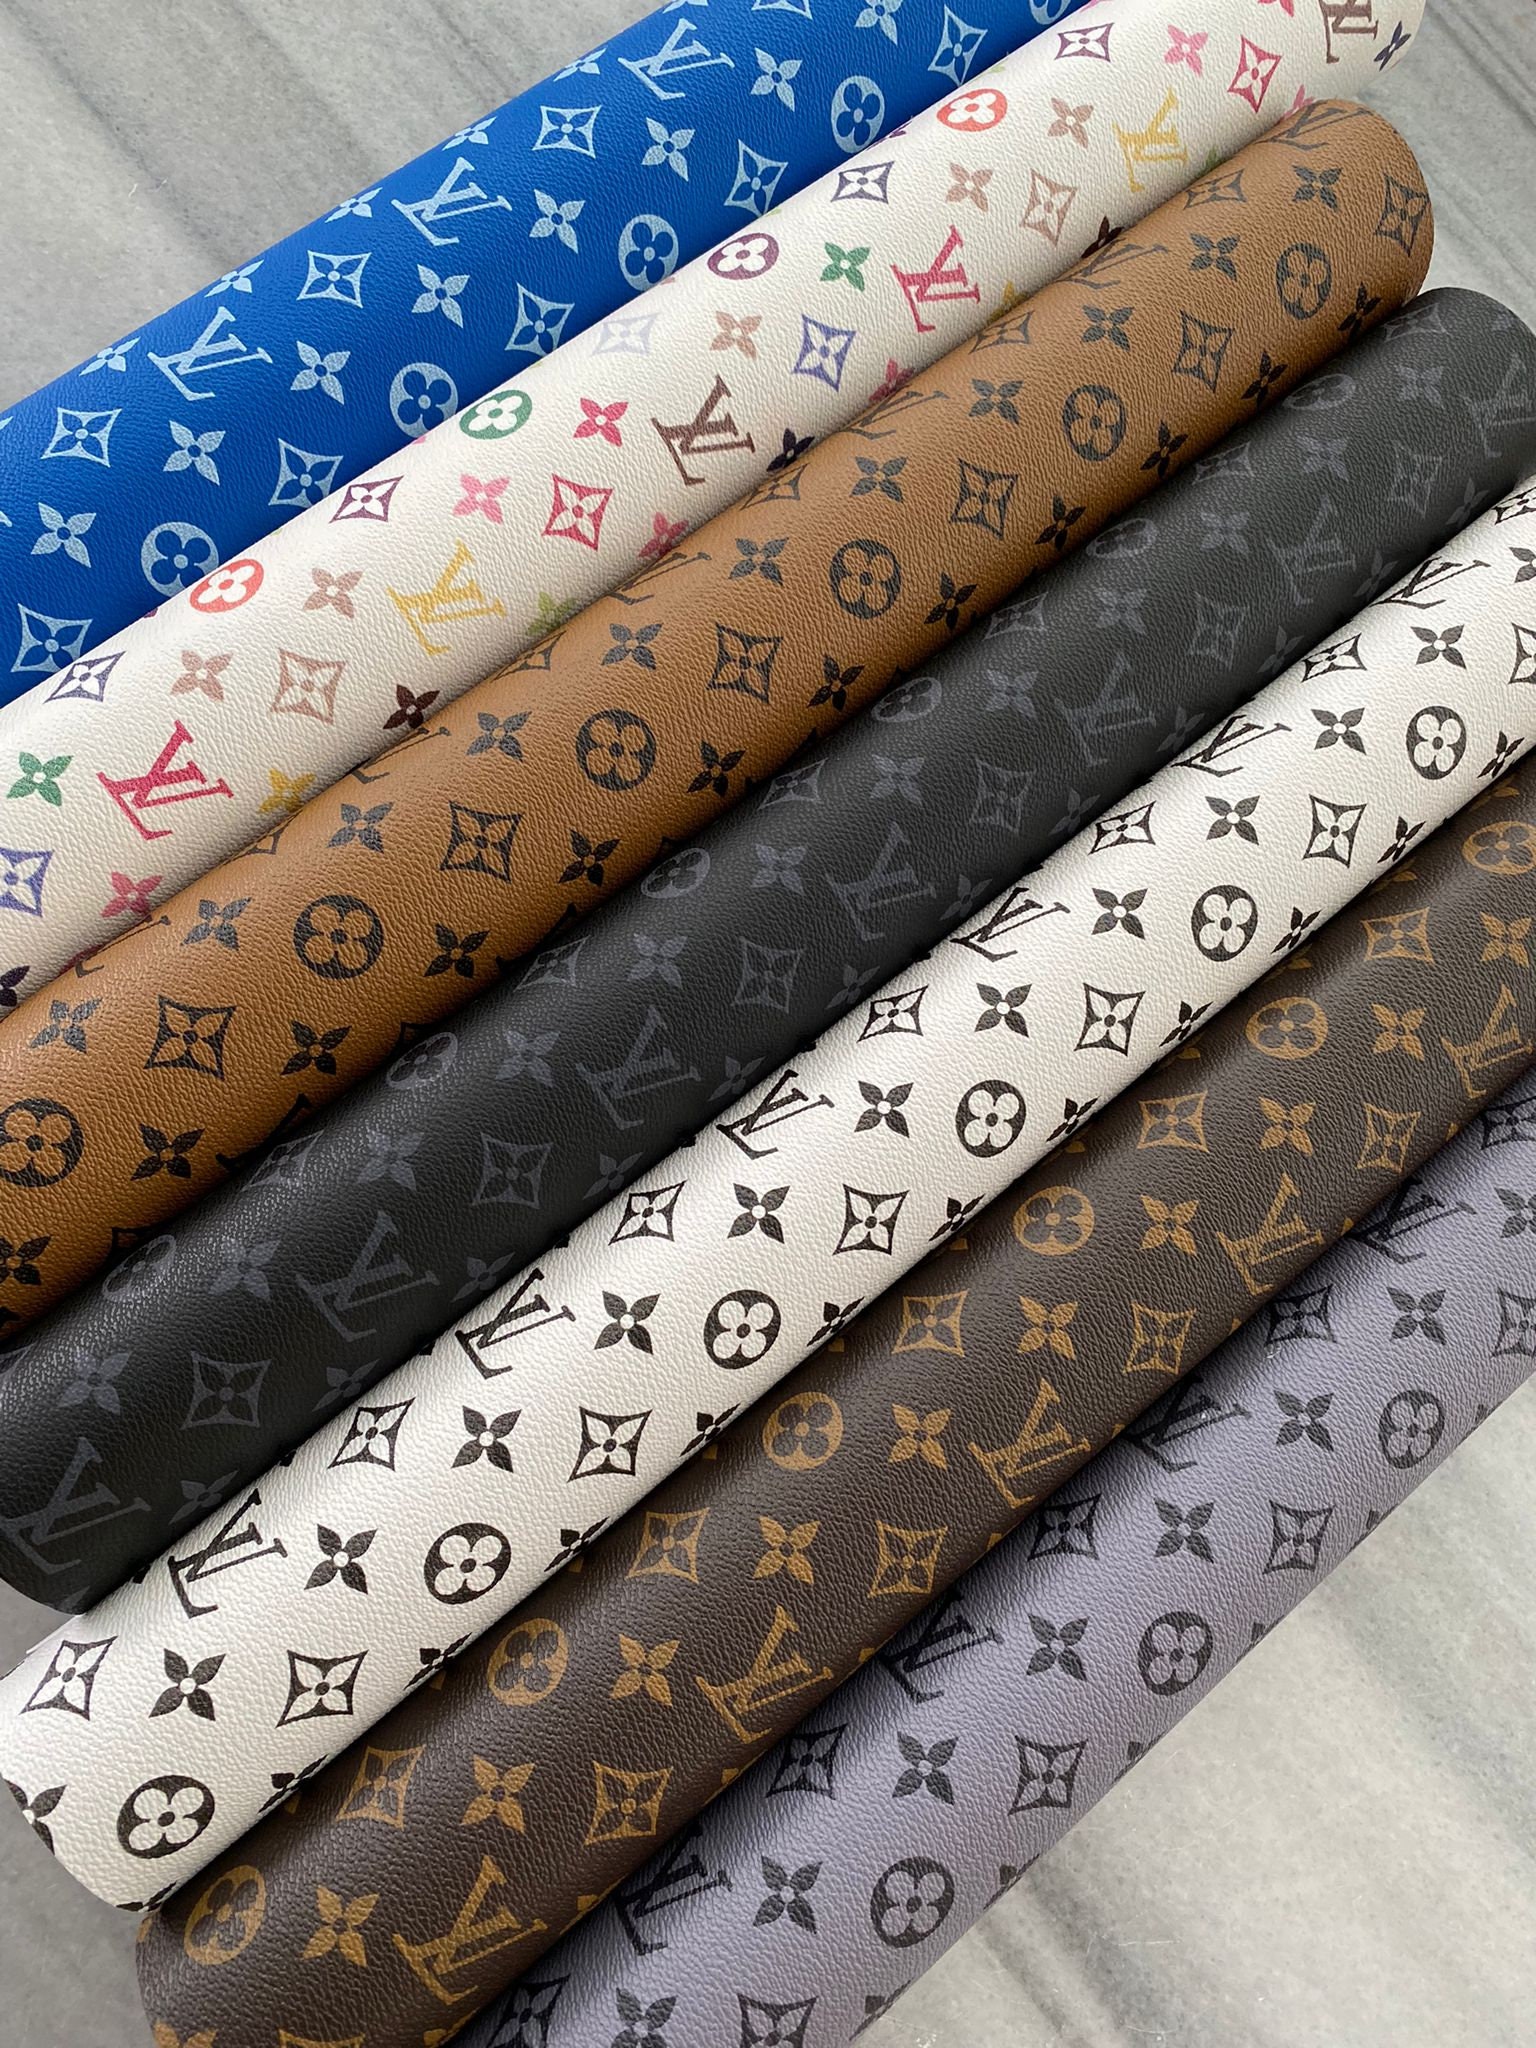 Louis Vuitton Fabric for Sale  LV fabric by the yard & roll